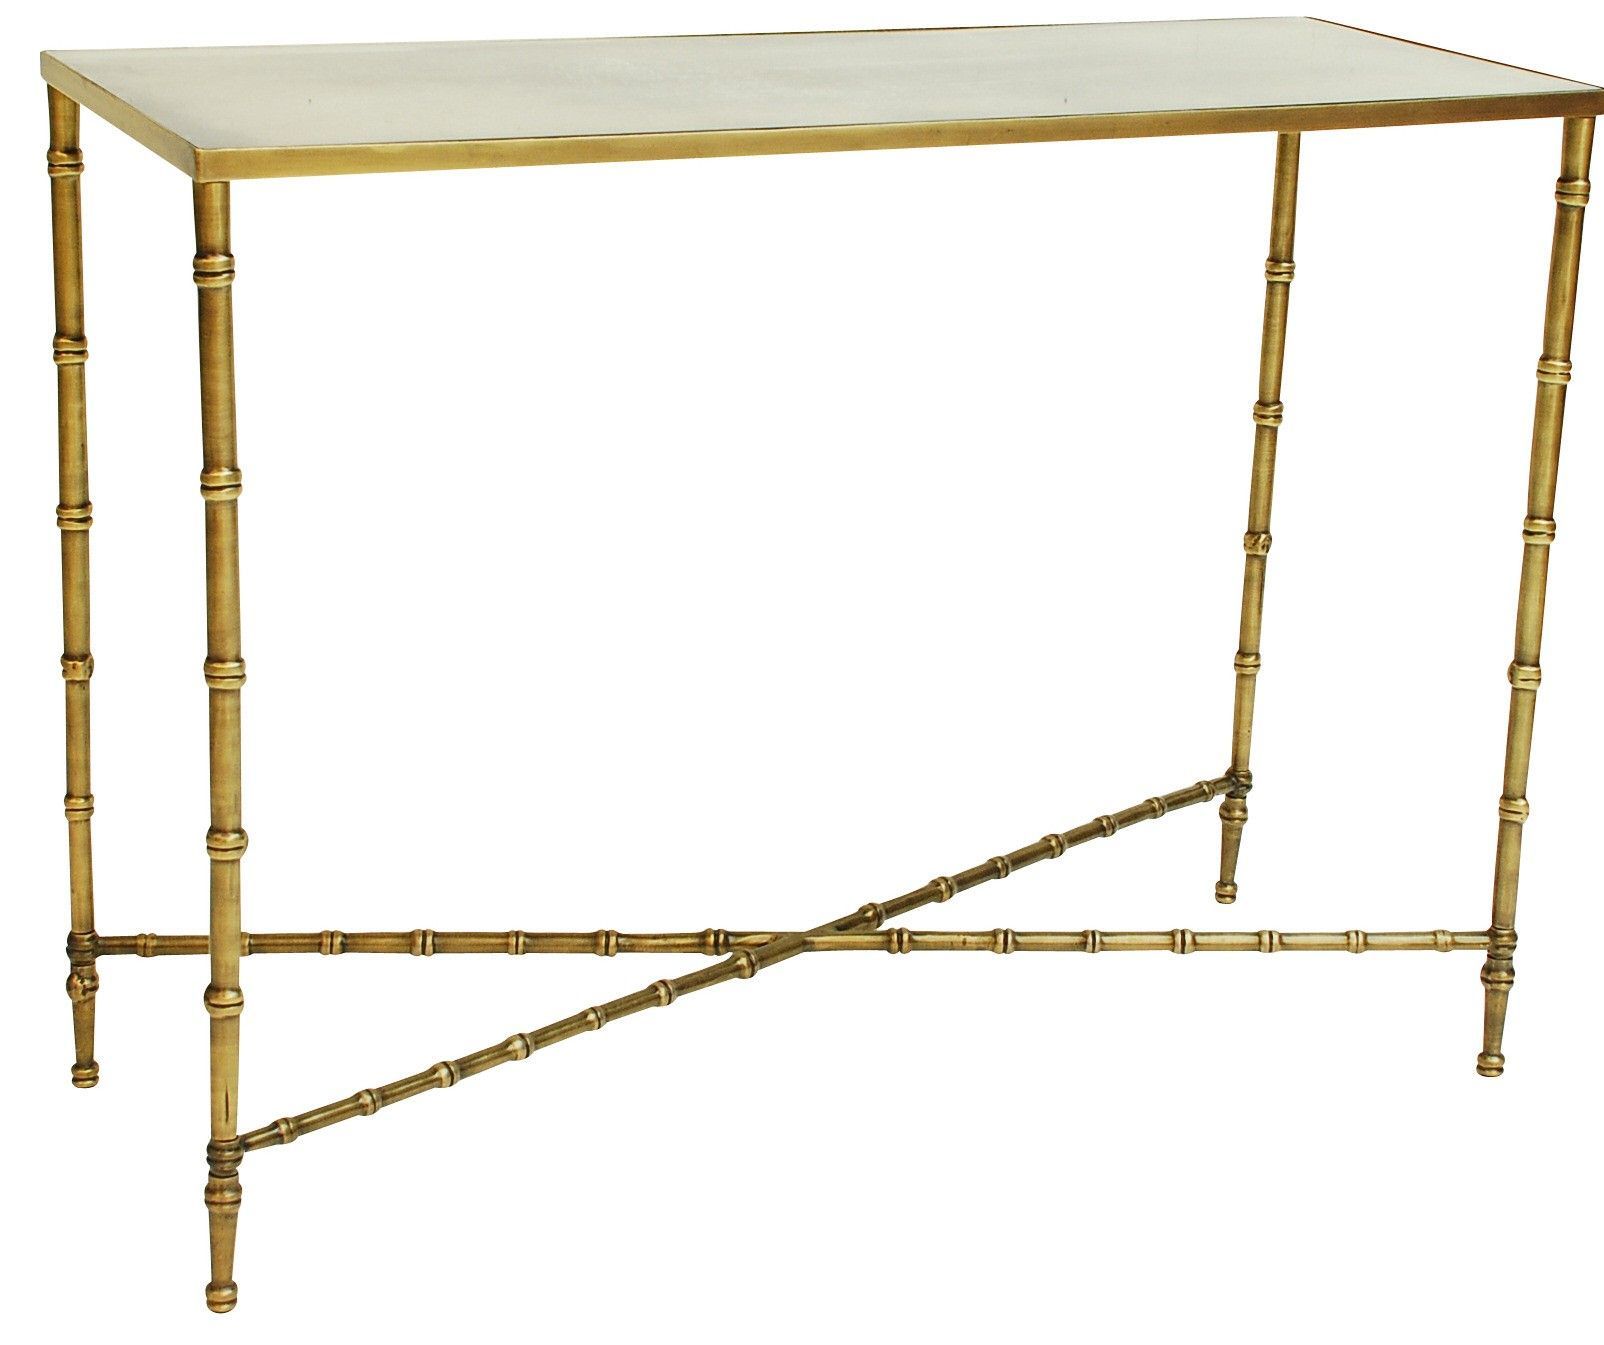 Bamboo Console Table With Antique Mirror The Bamboo Console Table With Within Antique Gold And Glass Console Tables (View 18 of 20)